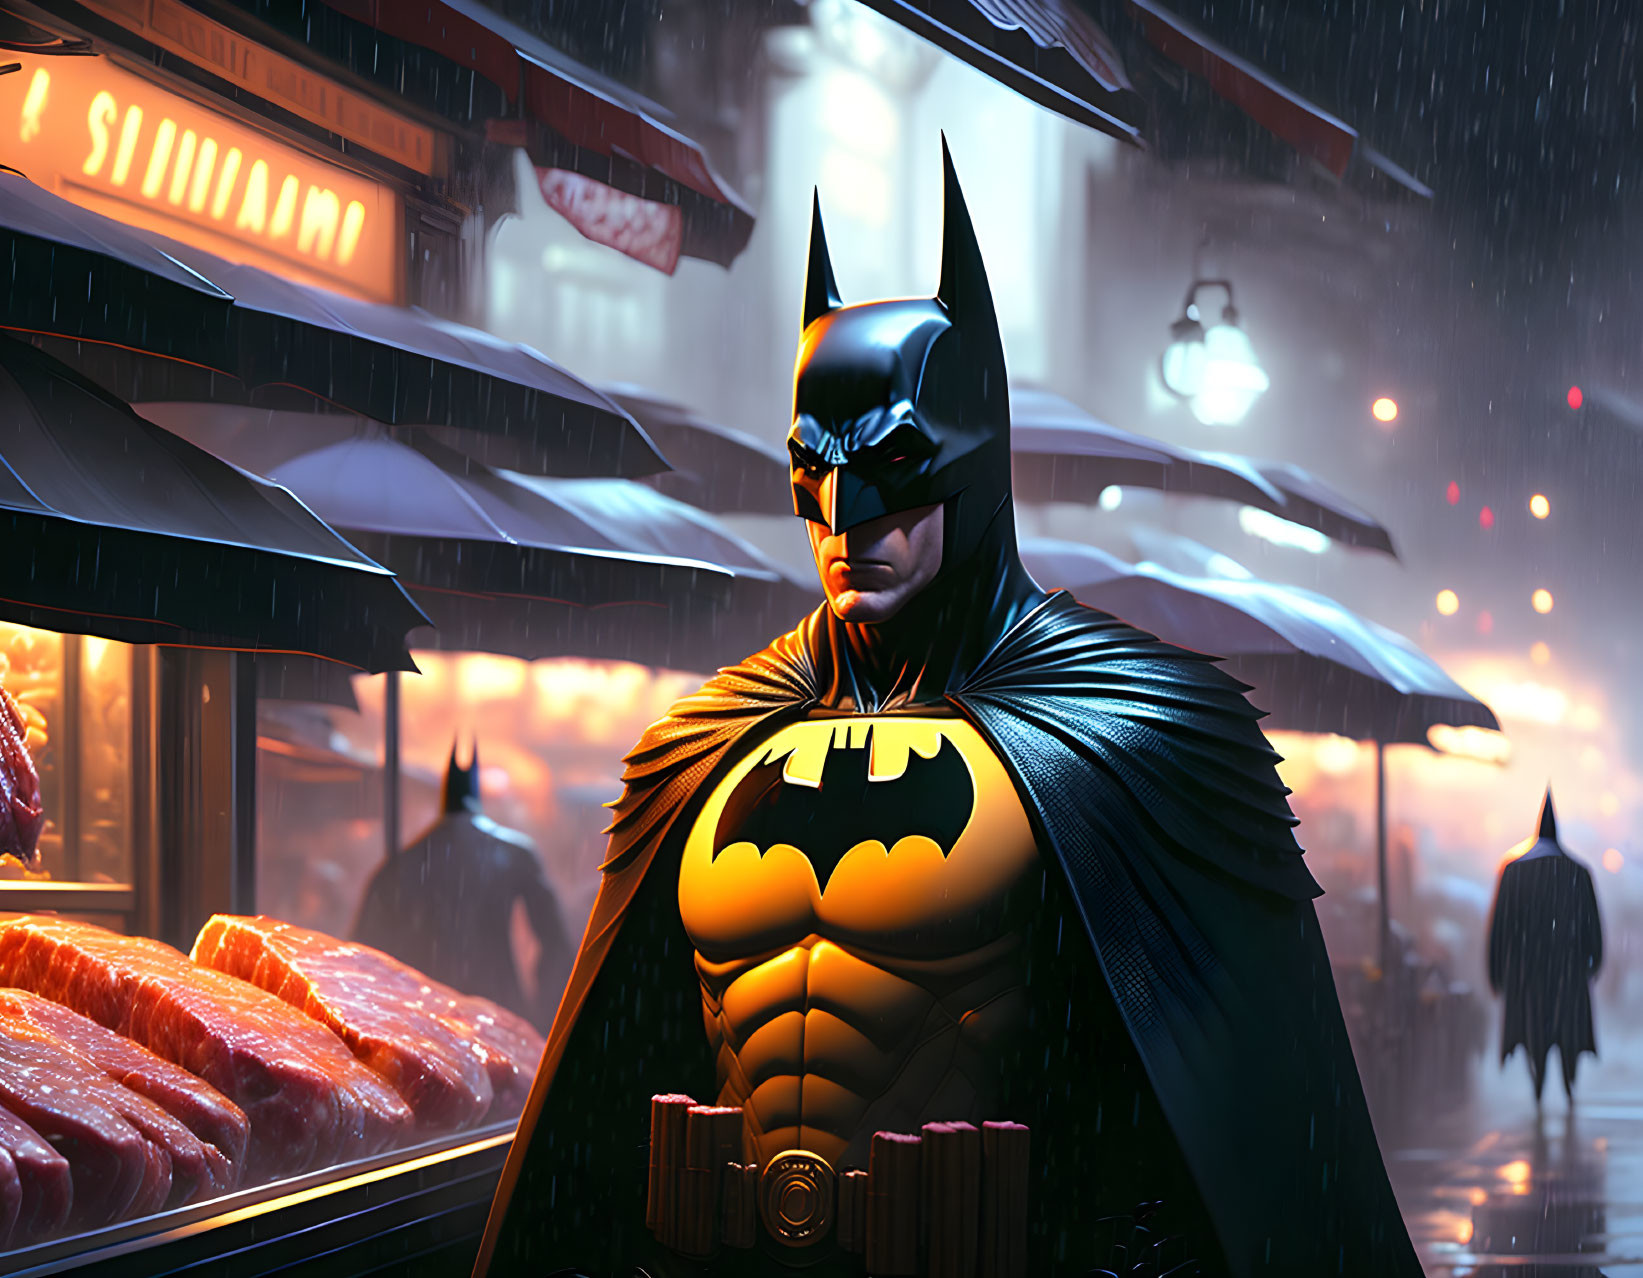 Determined Batman in rainy neon-lit street with passersby & Asian-style signage